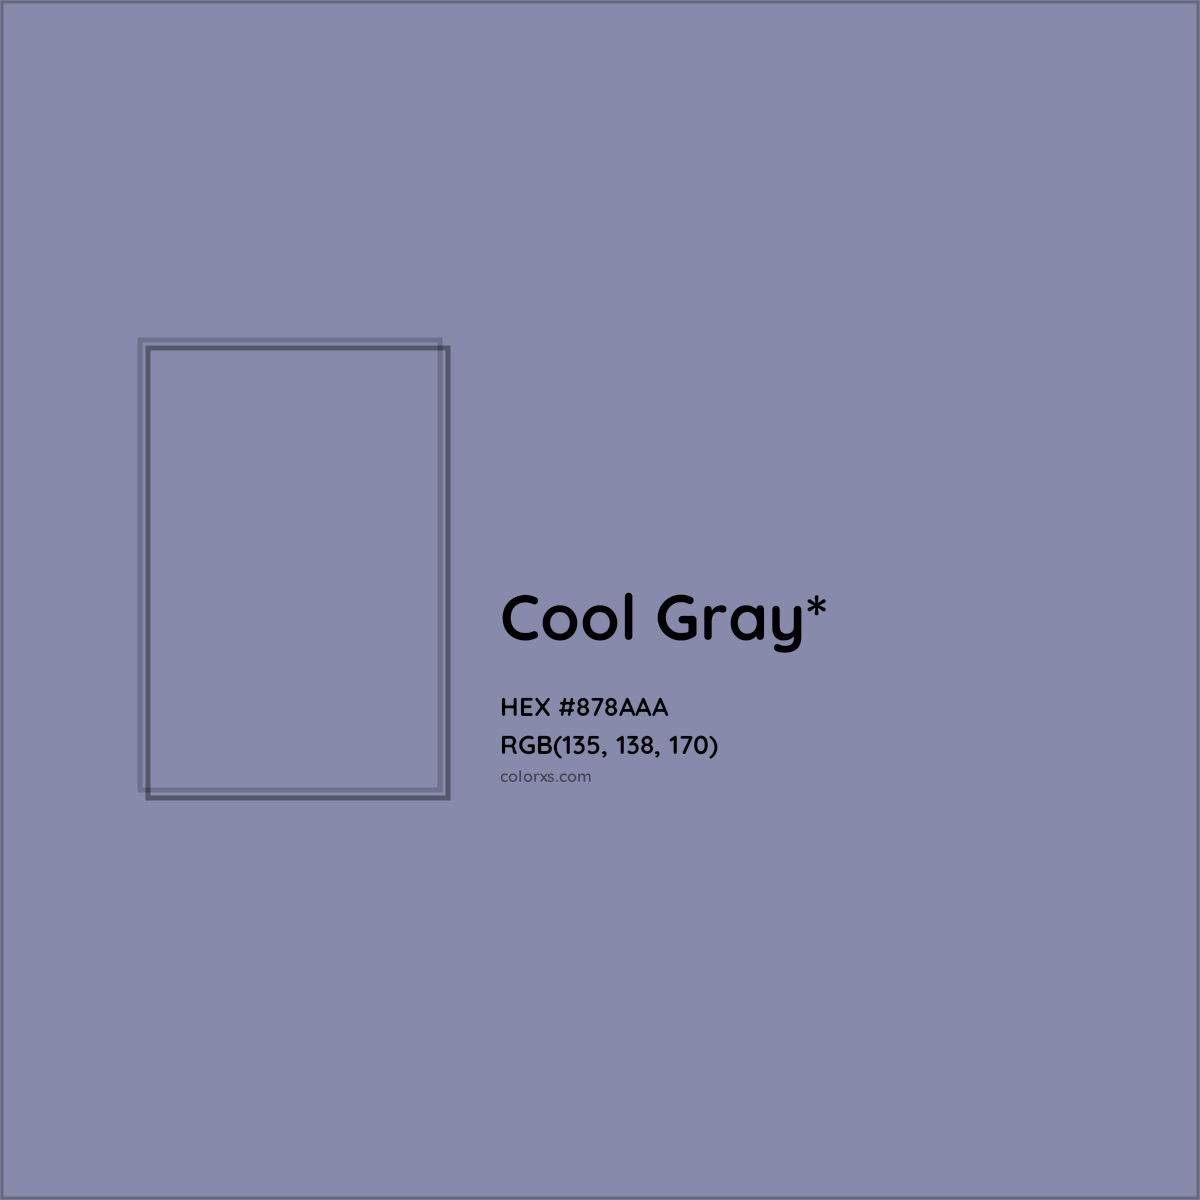 HEX #878AAA Color Name, Color Code, Palettes, Similar Paints, Images